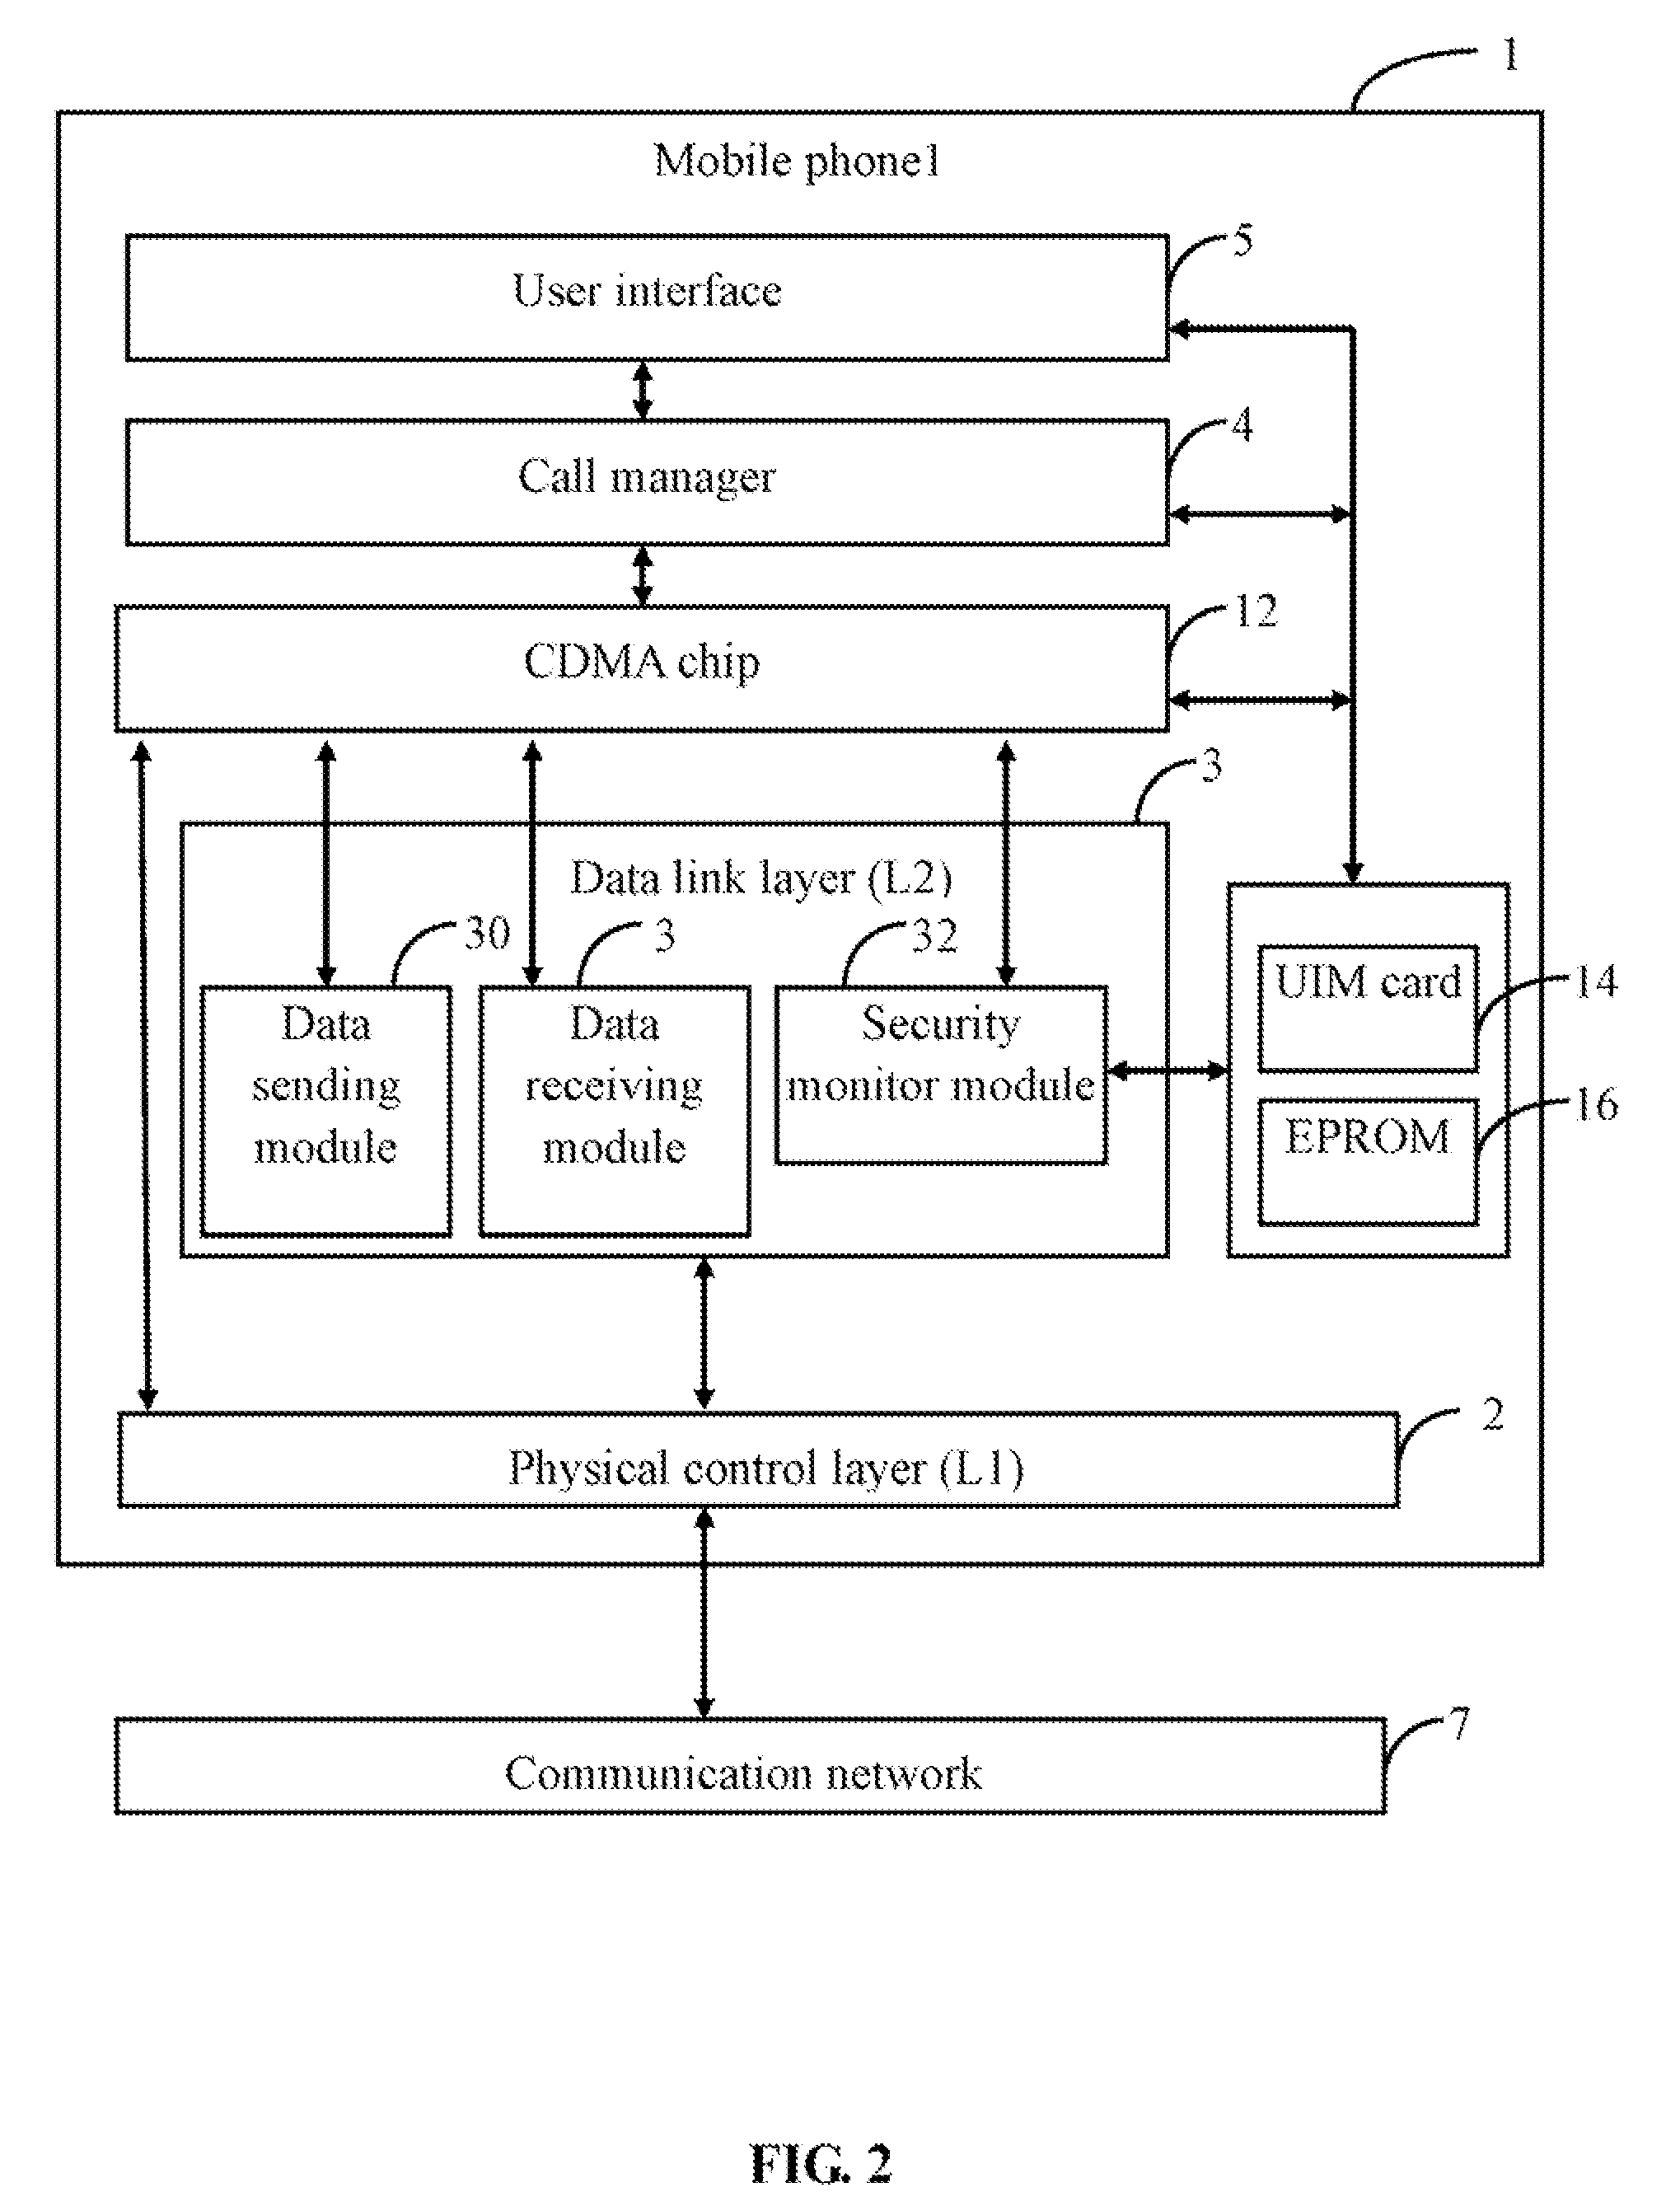 Network listening method of a mobile phone